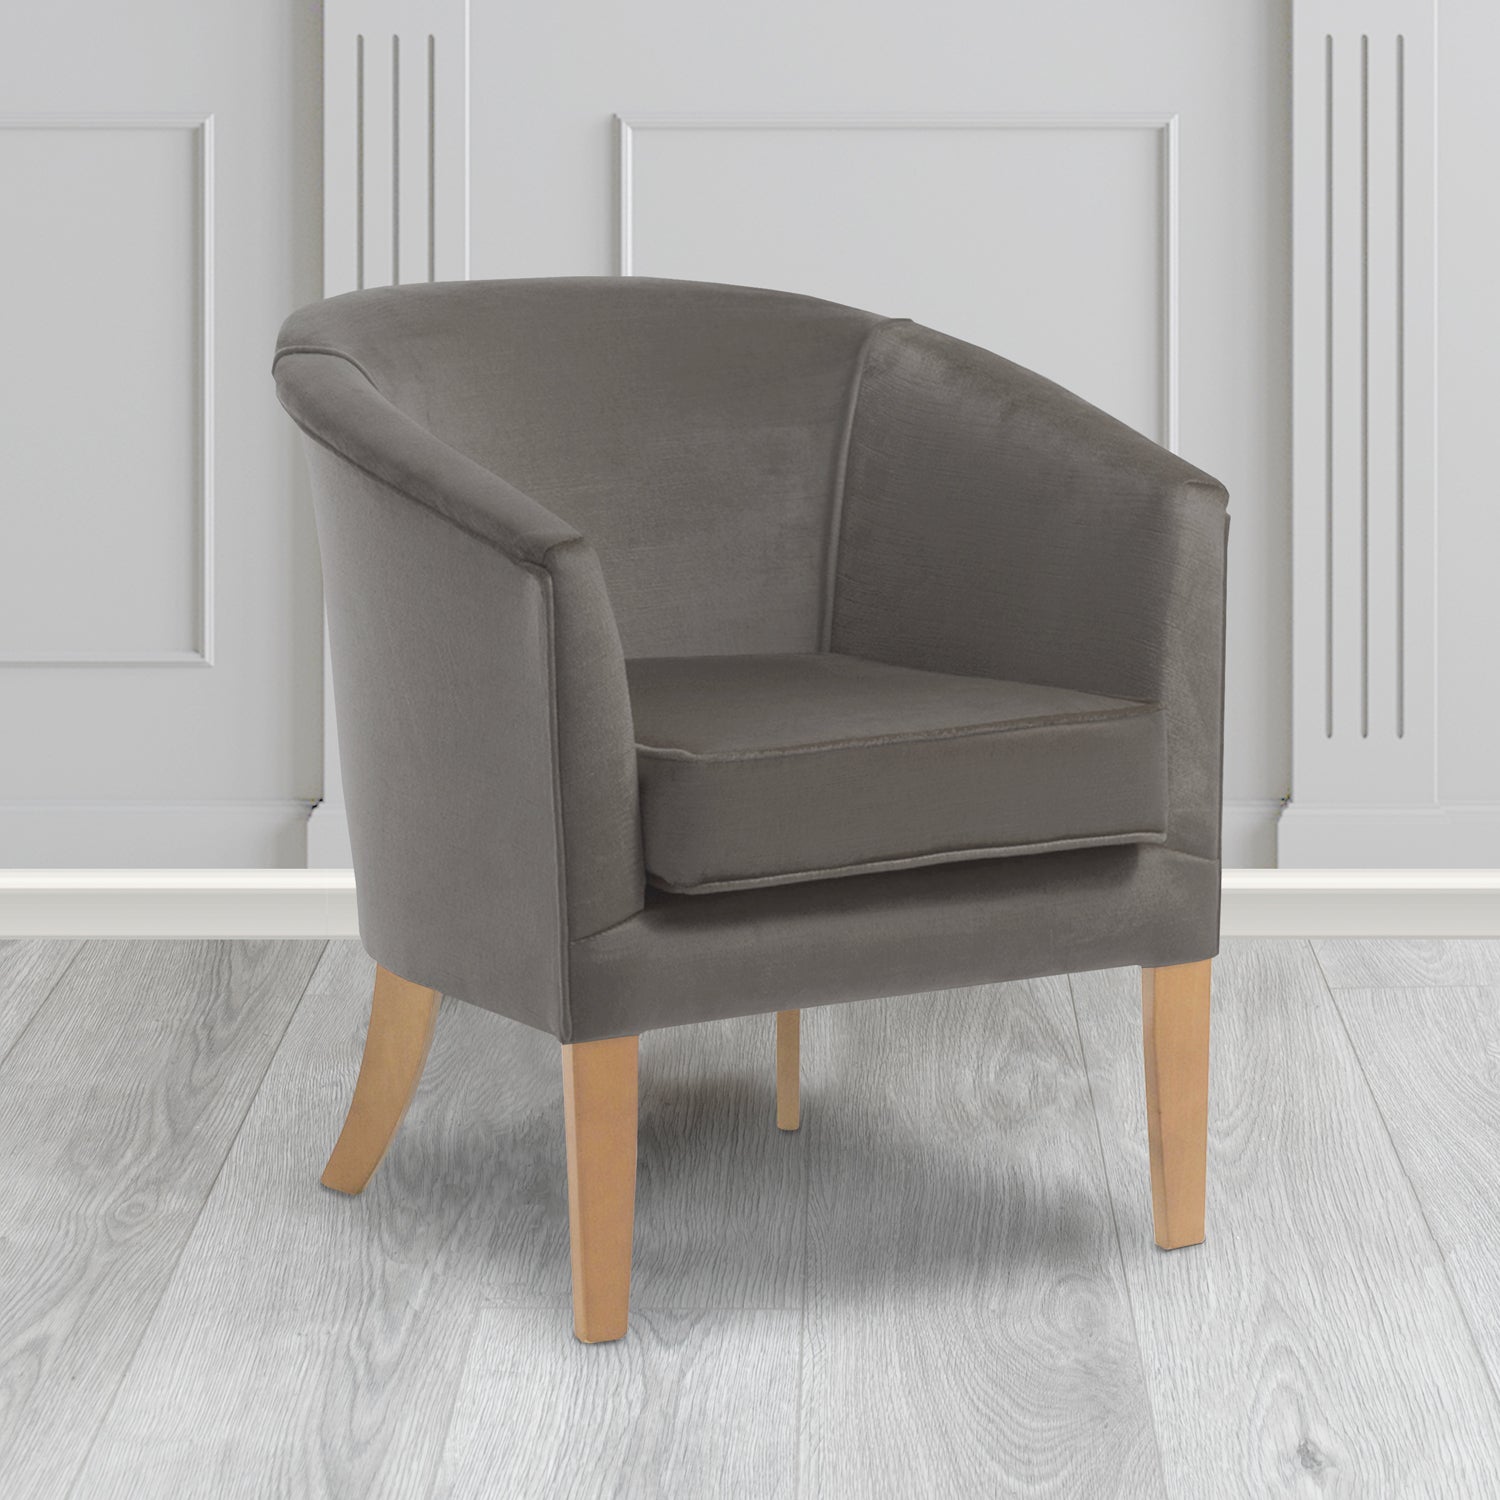 Jazz Tub Chair in Noble 917 Nickel Crib 5 Velvet Fabric - Water Resistant - The Tub Chair Shop